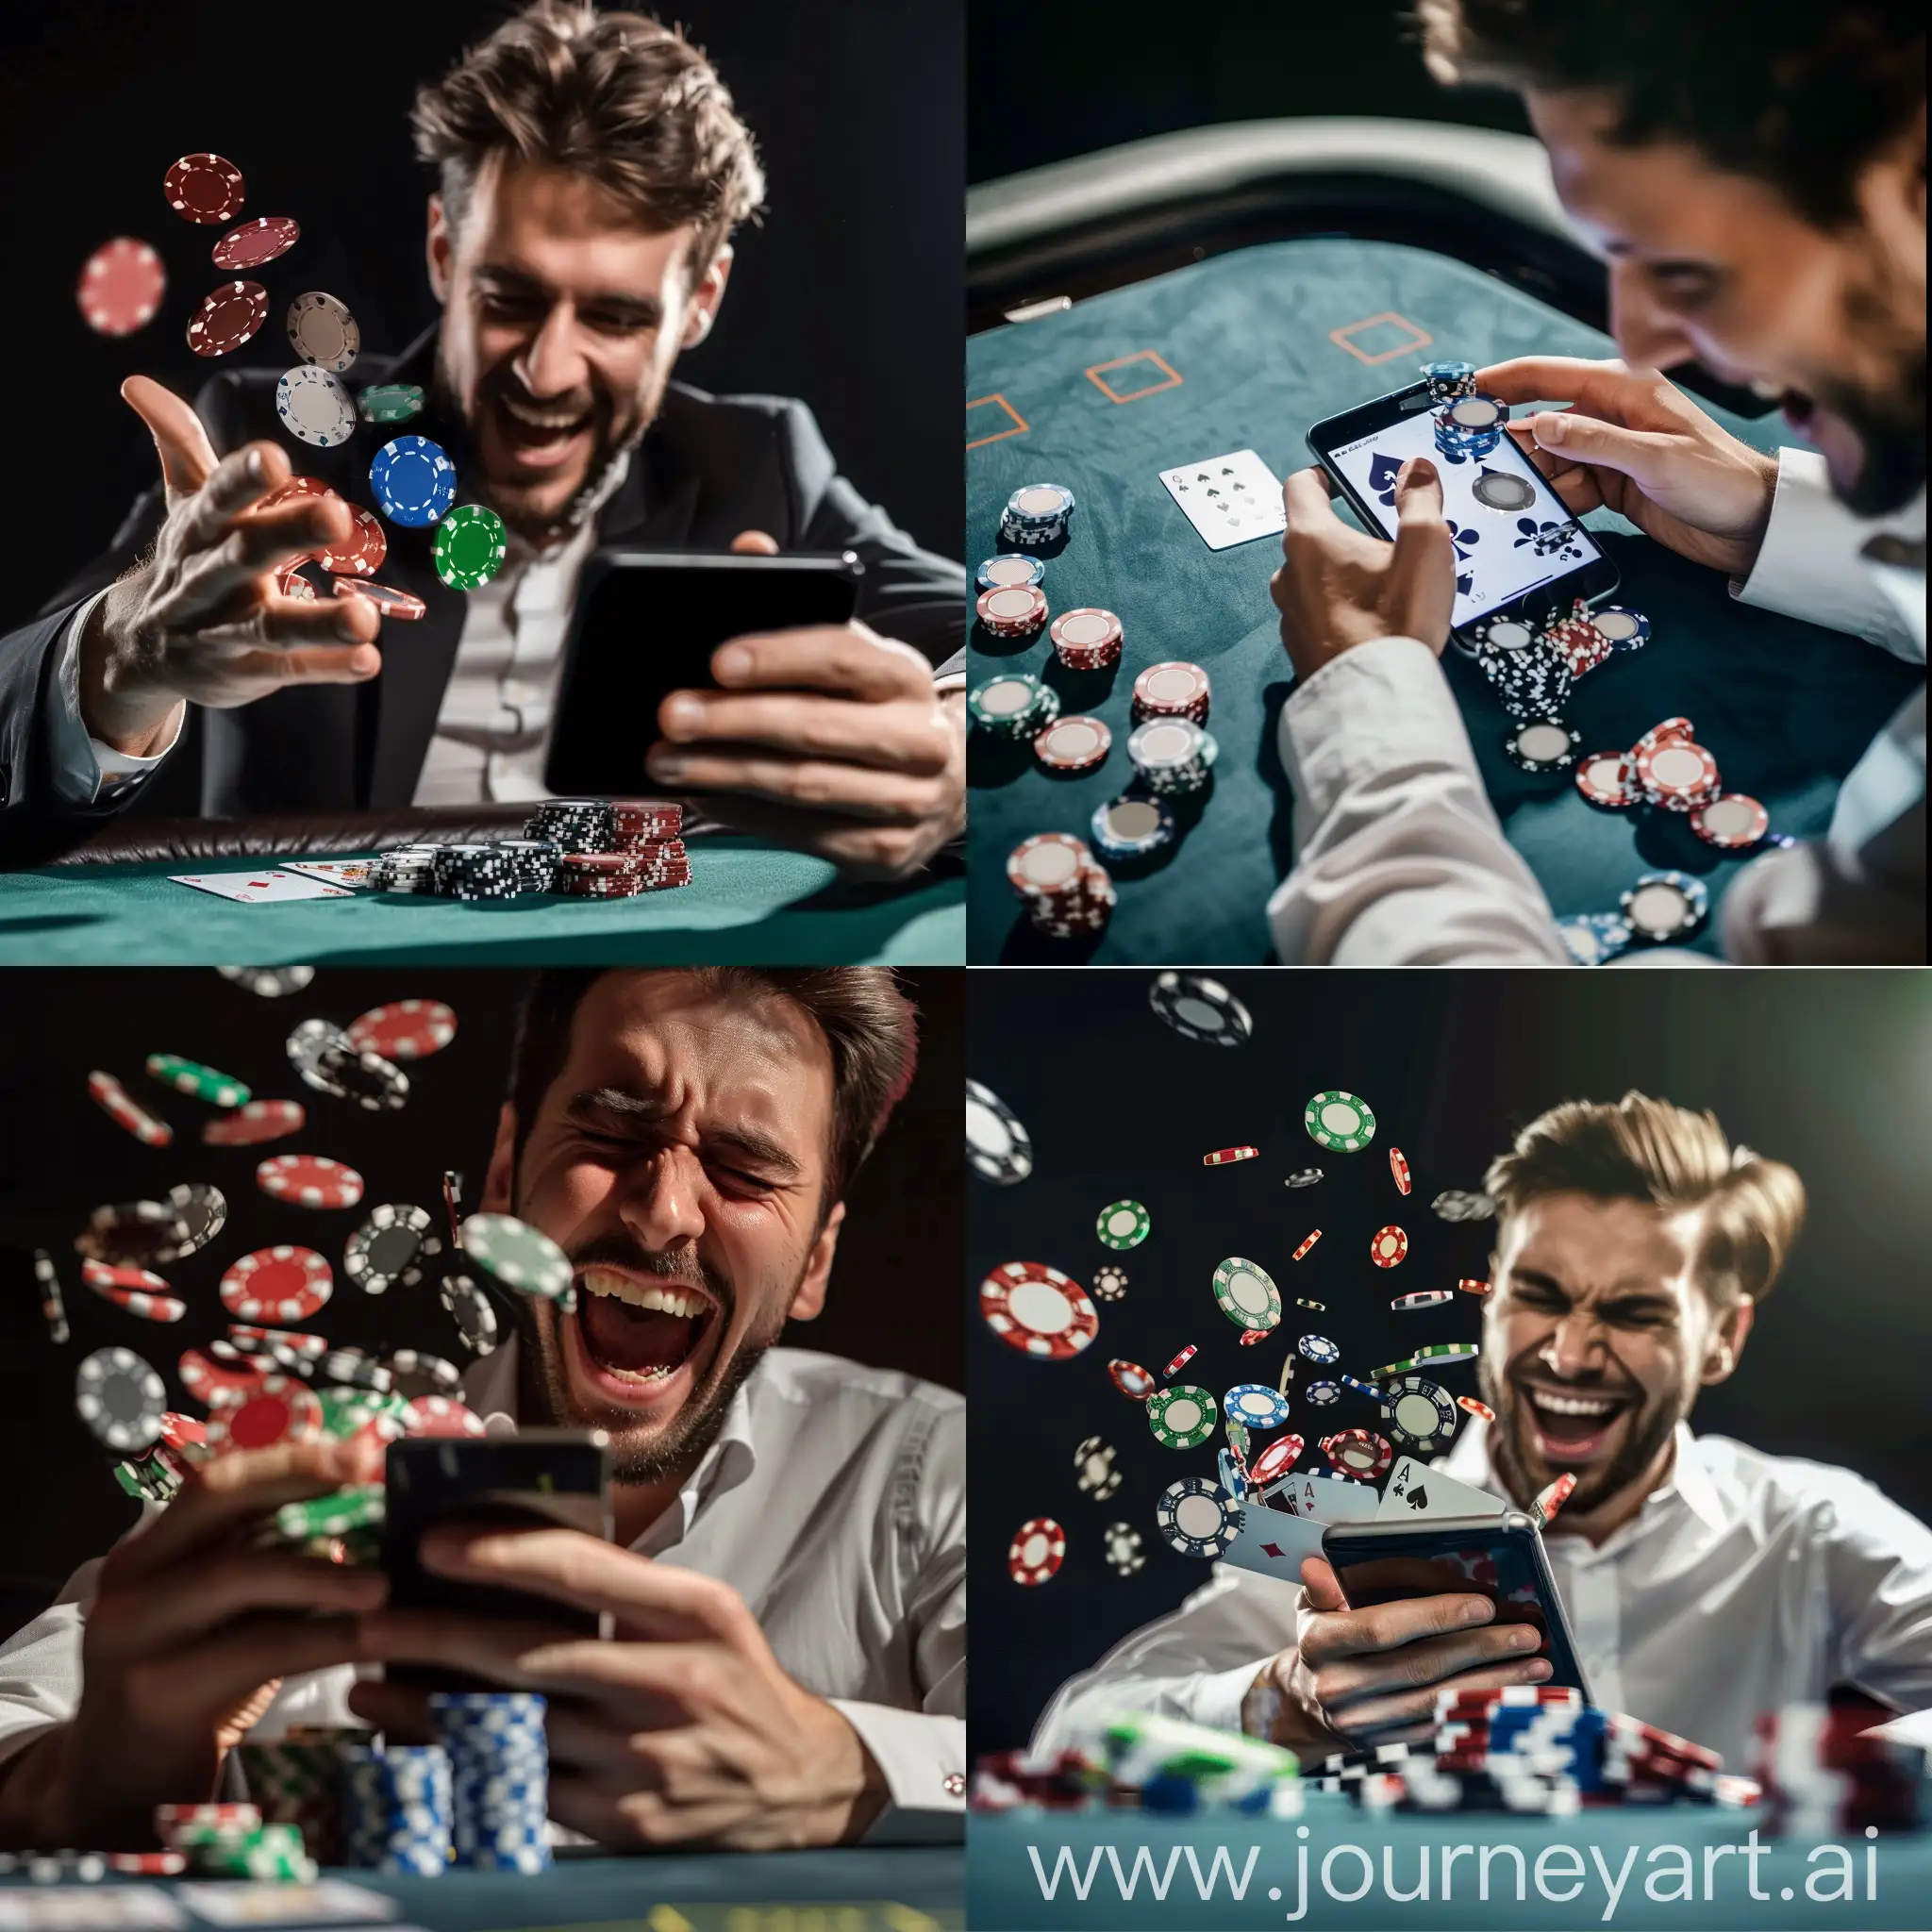 Suited-Man-Delighted-in-Online-Poker-Chips-Emerge-from-Device